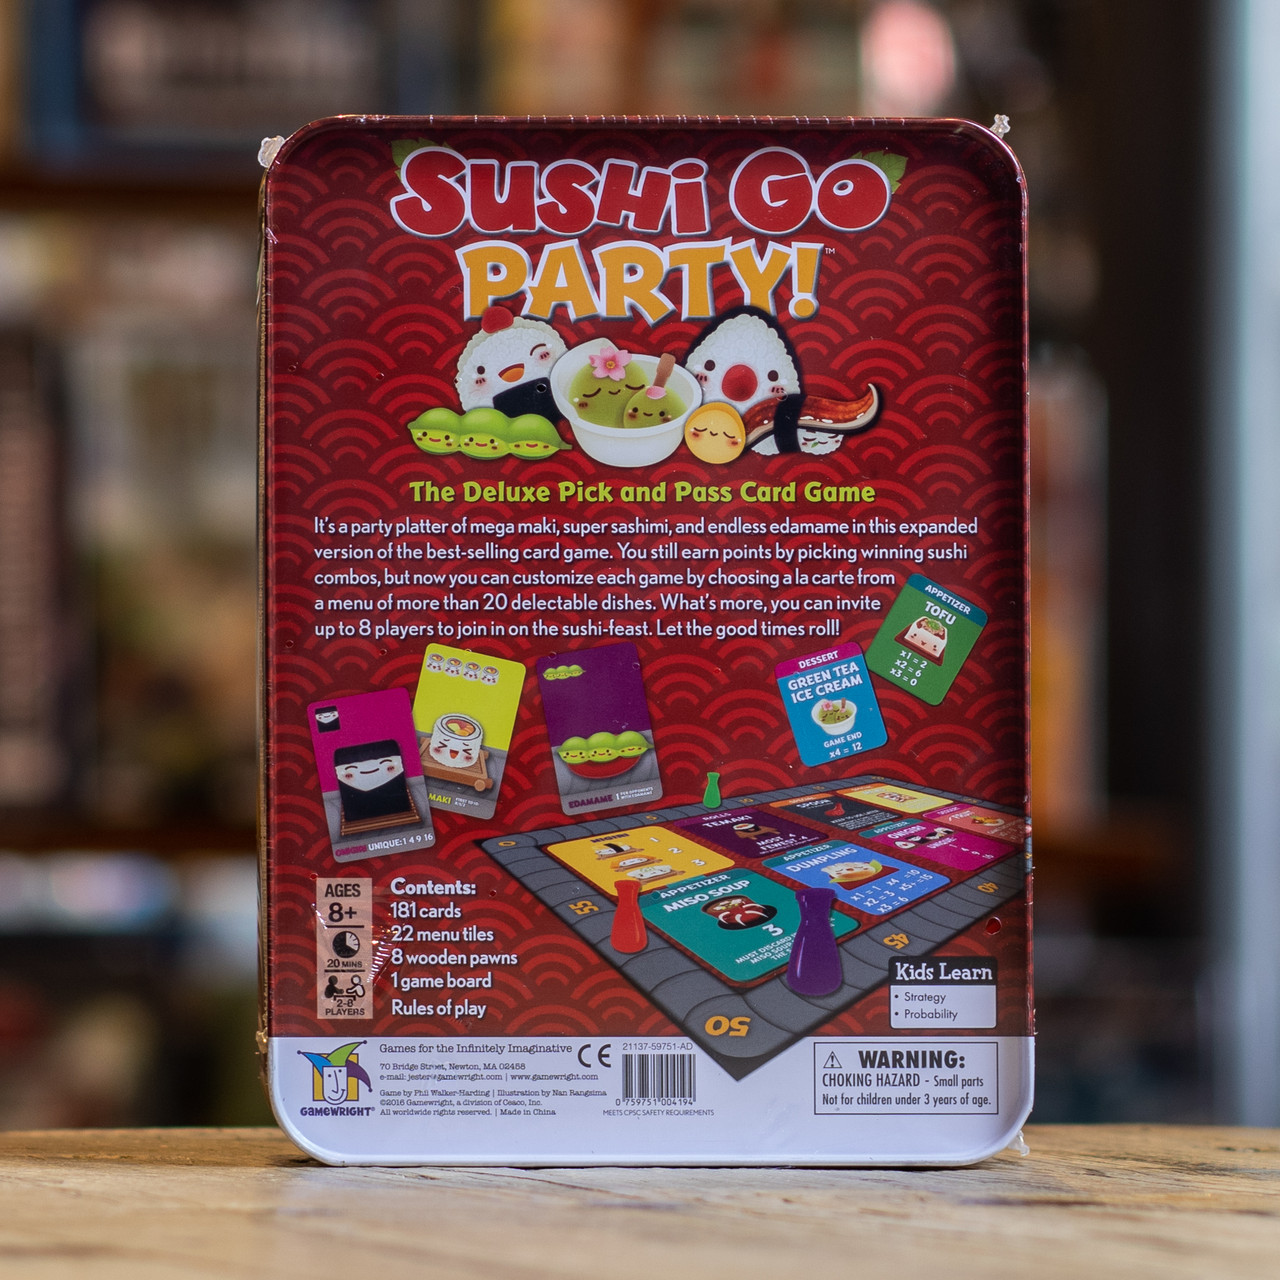 Sushi Go!-The Pick and Pass Card Game